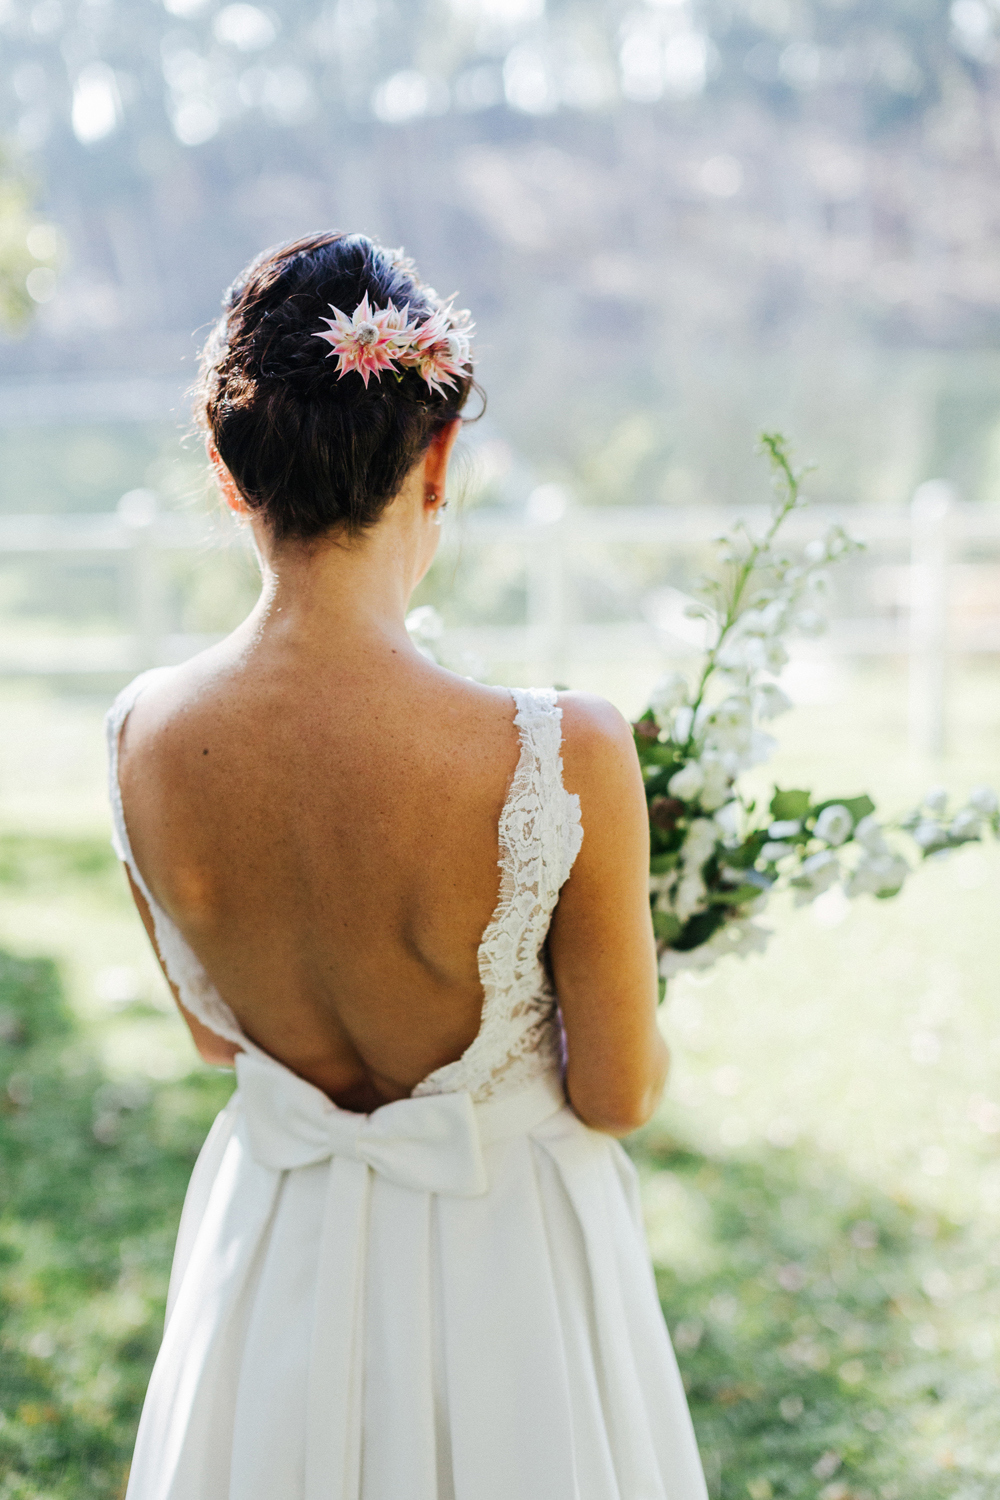 Lace Wedding Dress with Bow Detail | Images: Marli Koen